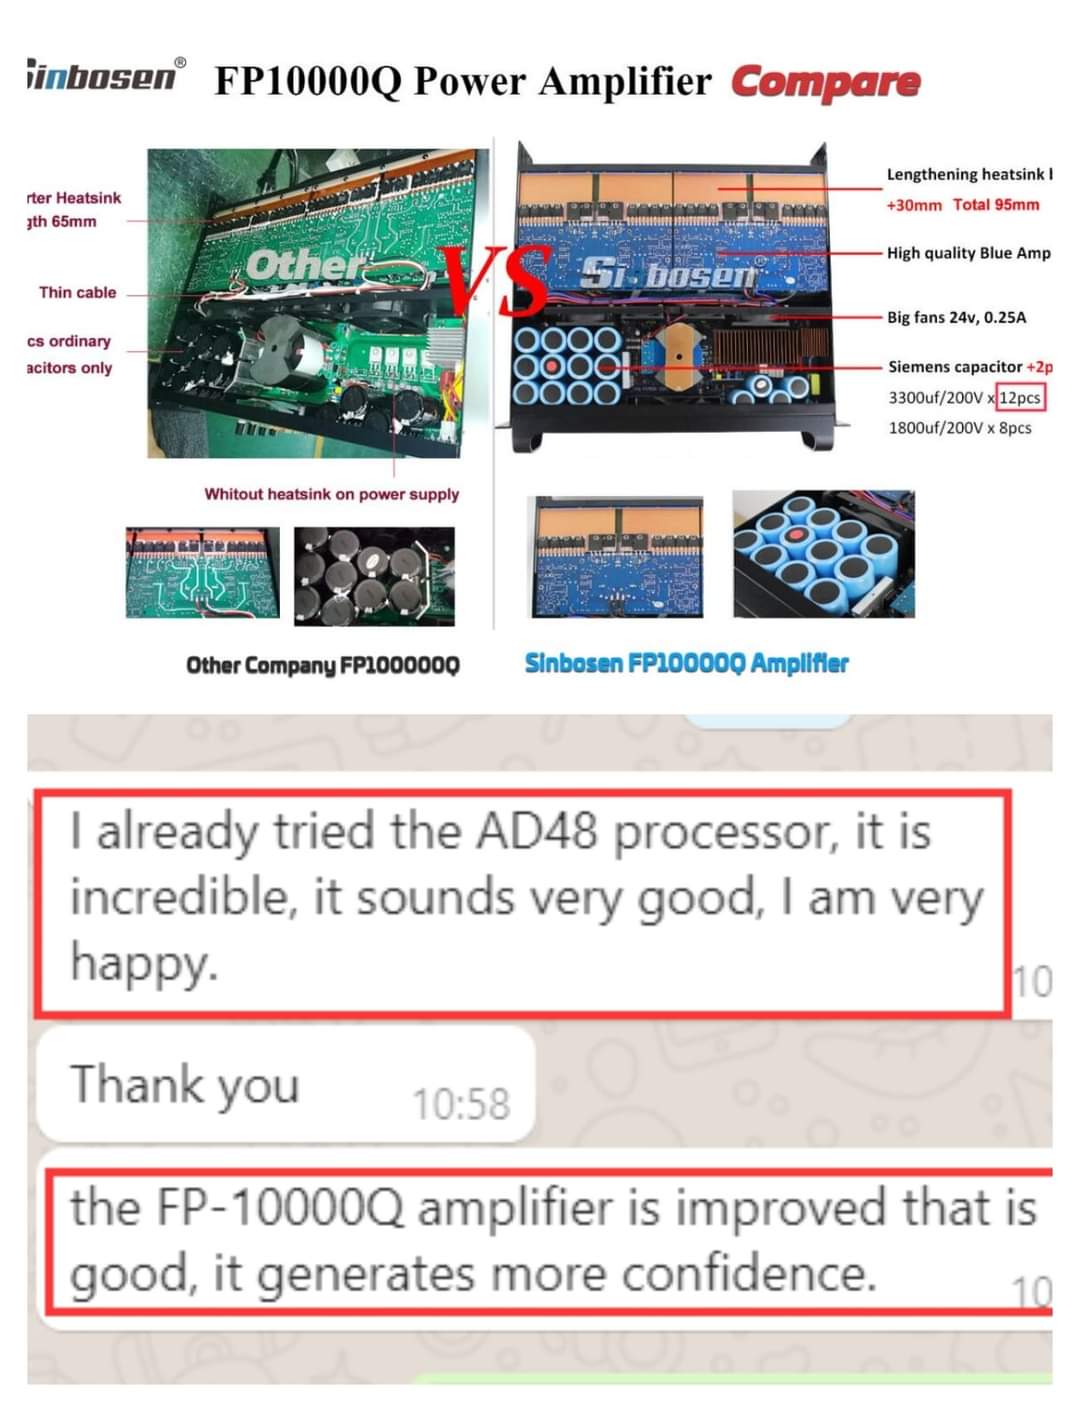 How is the clients feeback about sinbosenaudio's power amplifier FP10000Q improved version